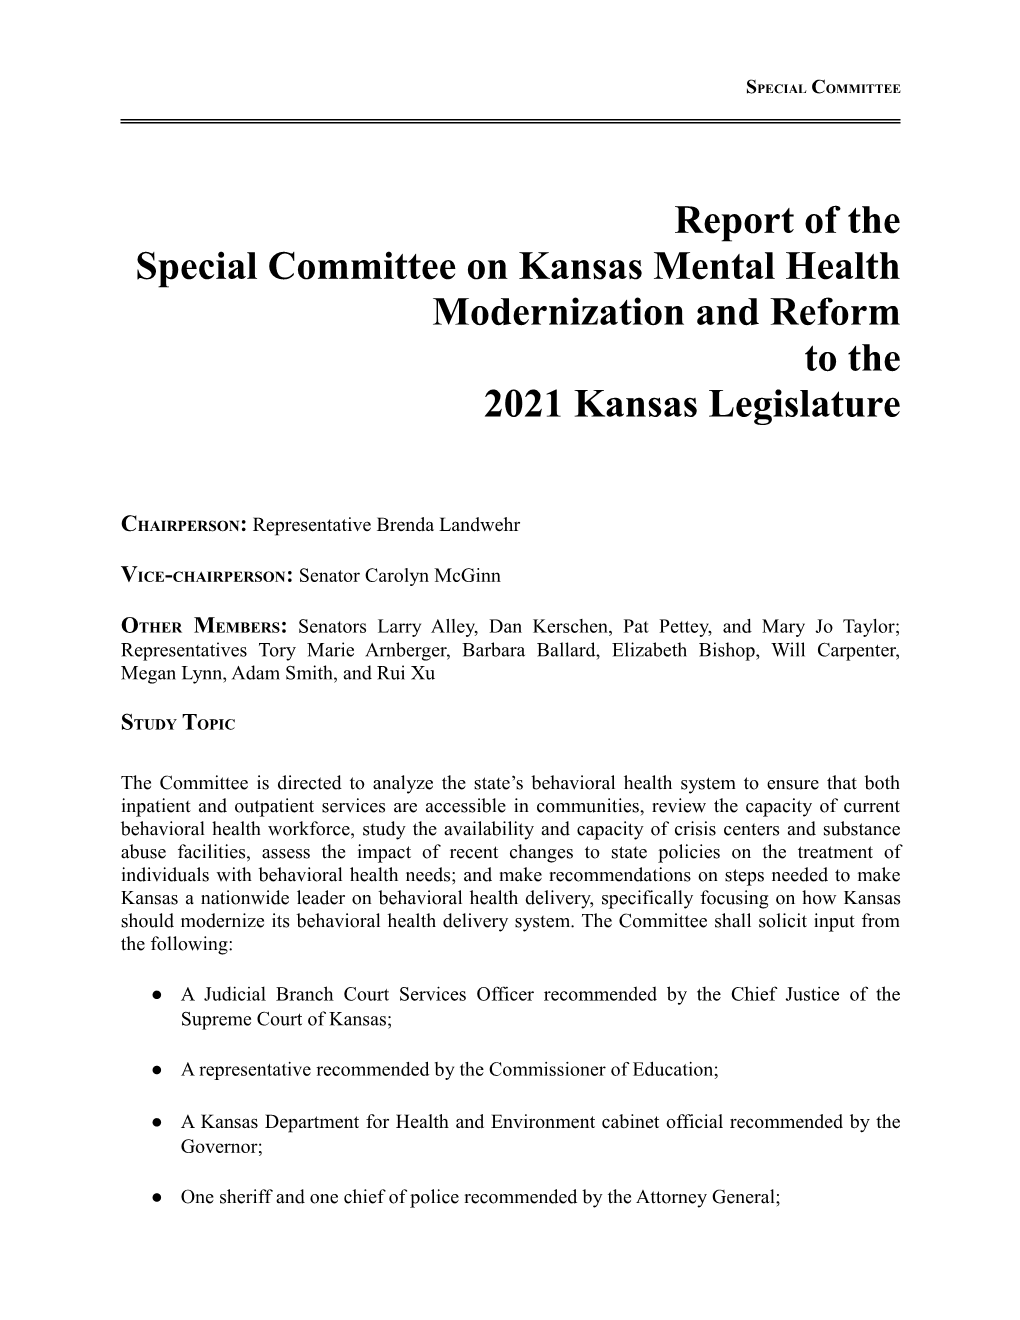 Special Committee on Mental Health Modernization and Reform; December 2020